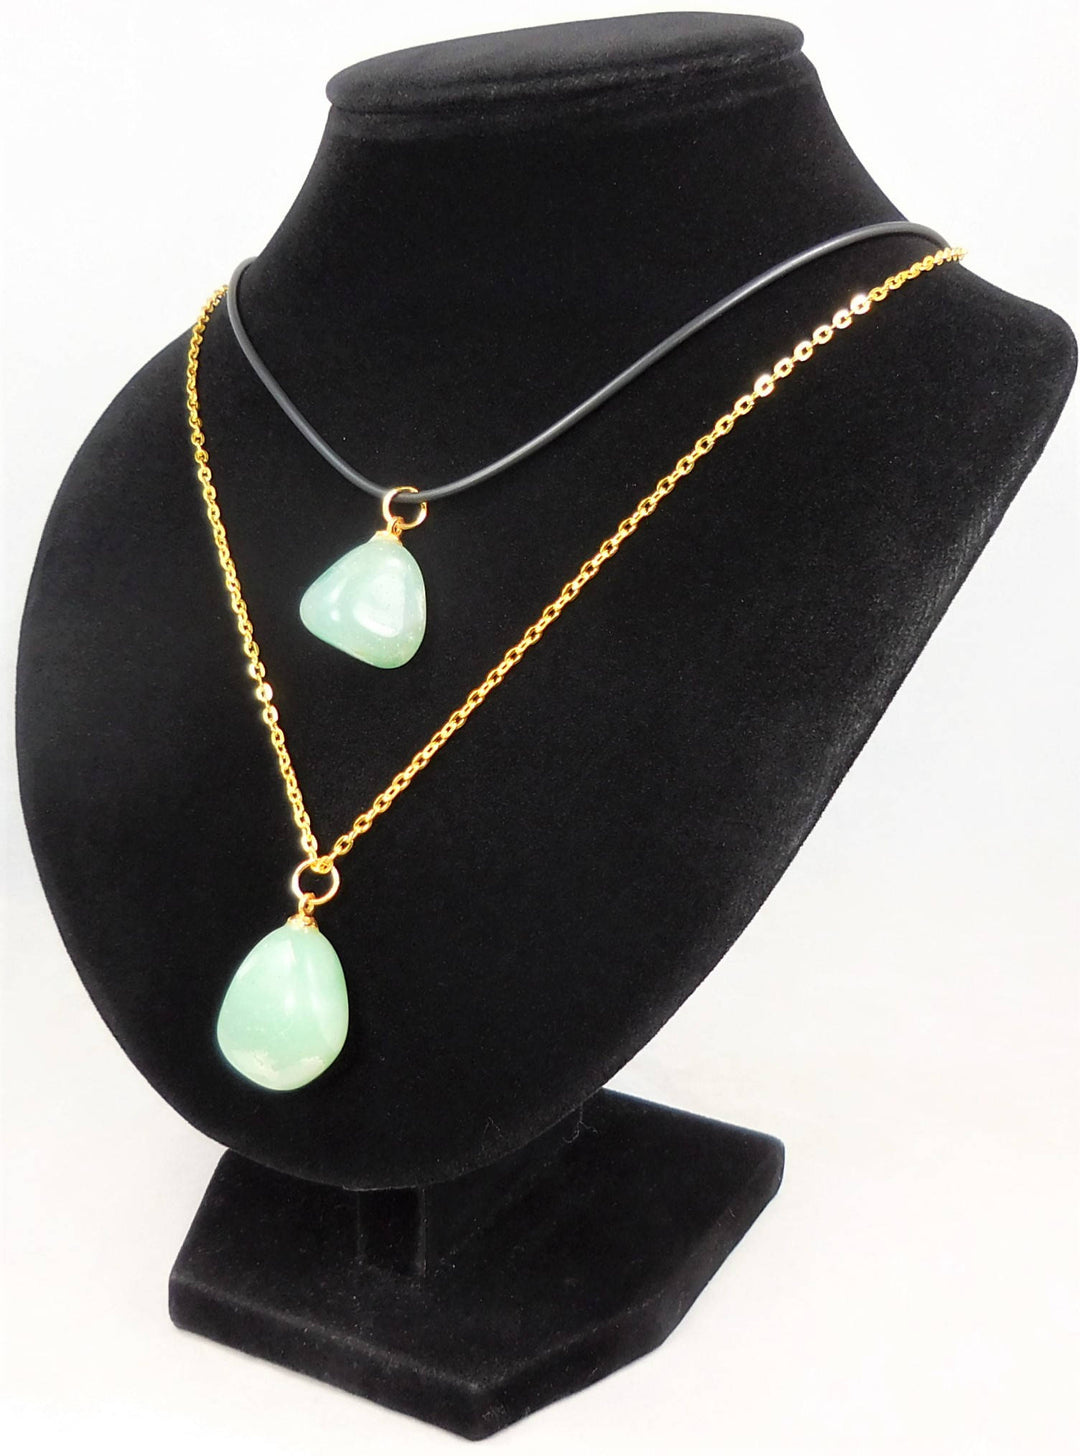 Aventurine Necklace - Green Tumbled Gemstone Pendant - Polished Crystal - Gold (A10) Healing Crystals and Stones Jewelry